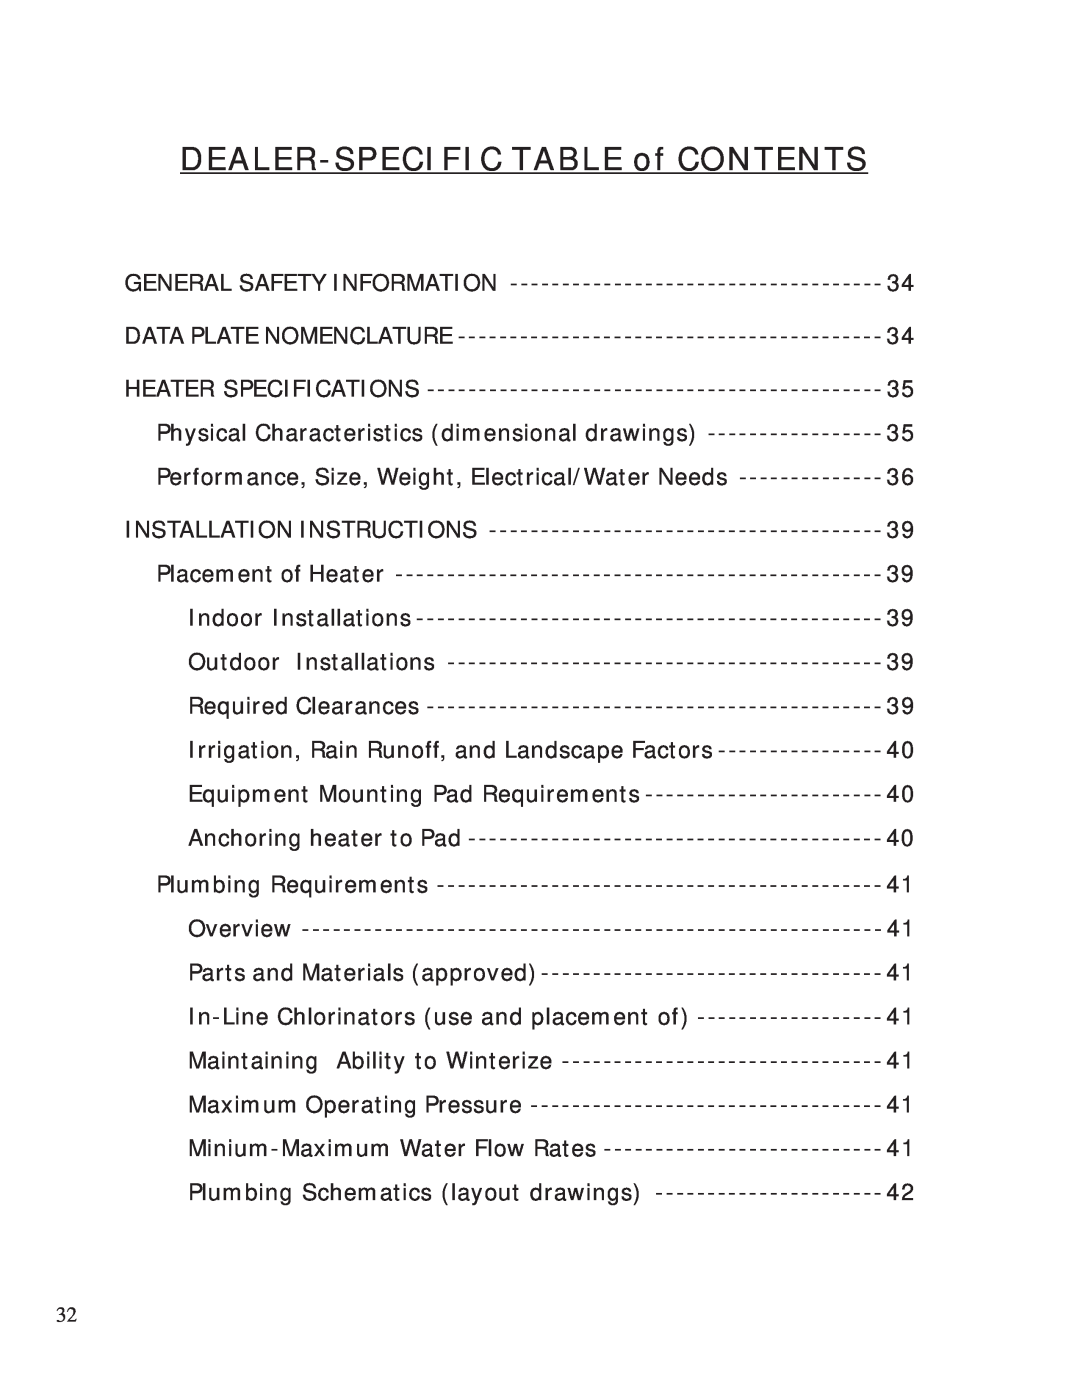 Aquacal 155, 120 owner manual DEALER-SPECIFICTABLE of CONTENTS 